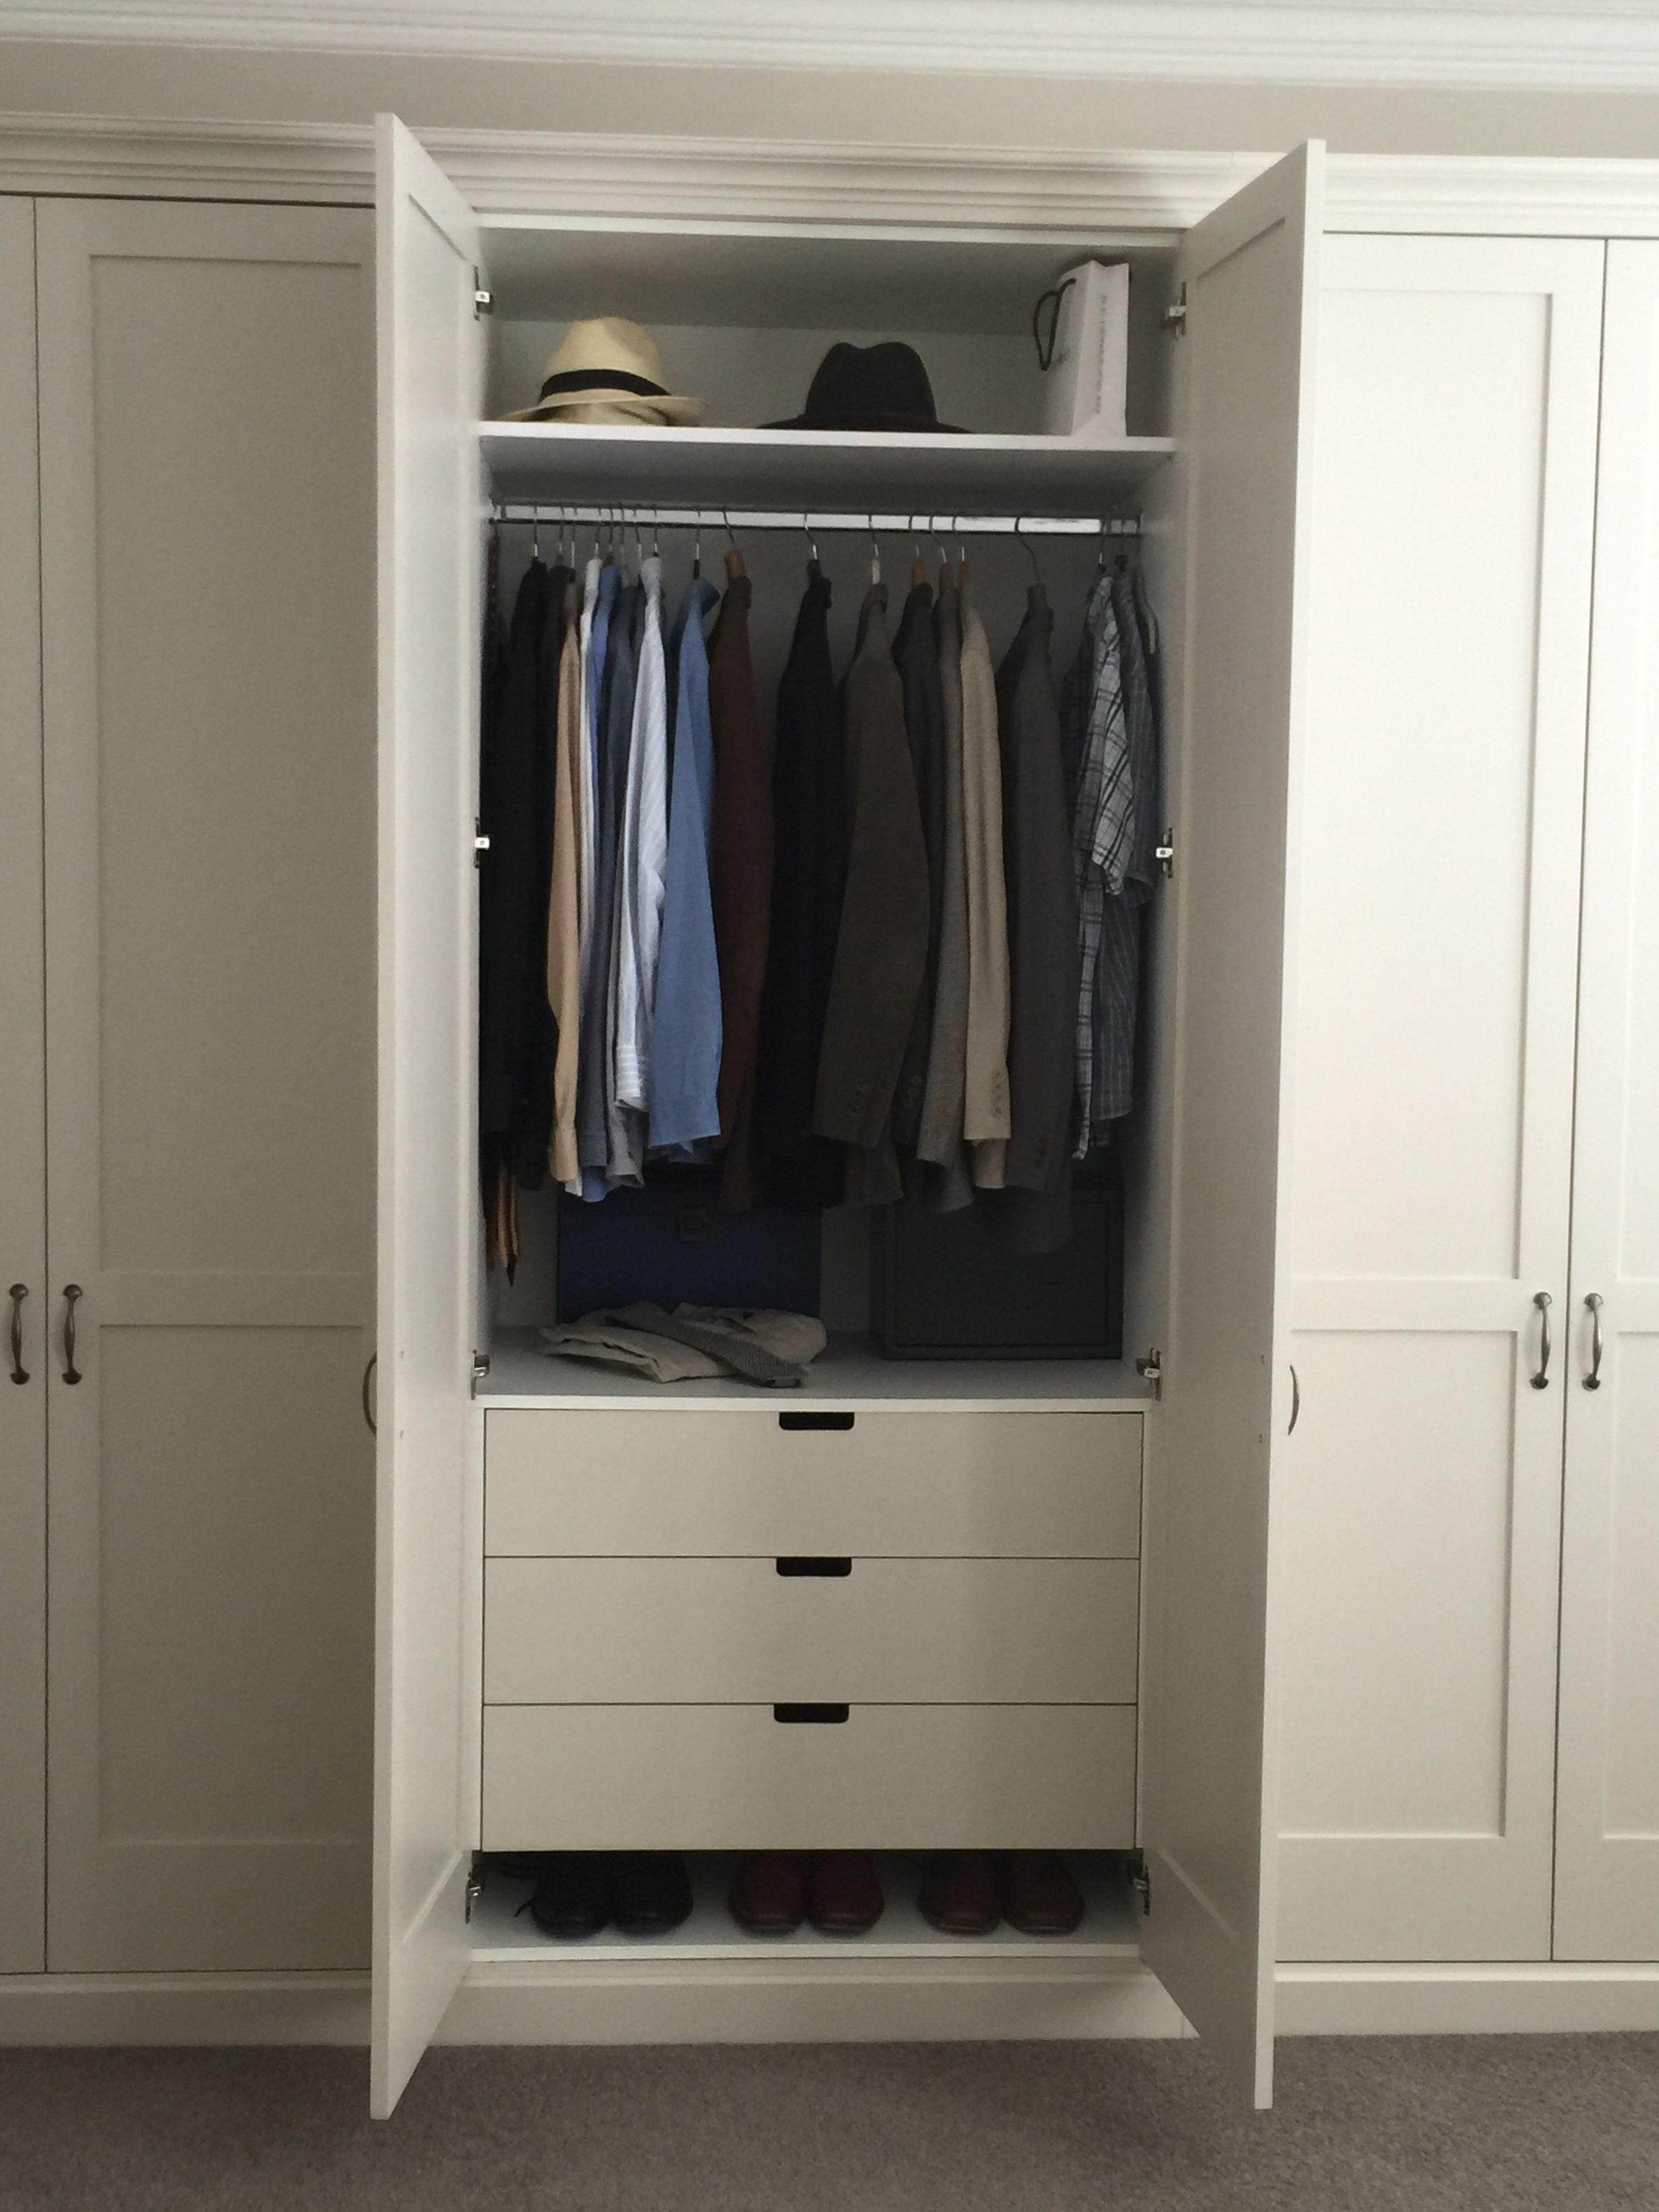 Well Known Traditional Shaker Wardrobes, With Drawers Inside, Shelves And Inside Wardrobes With Shelves And Drawers (View 5 of 15)